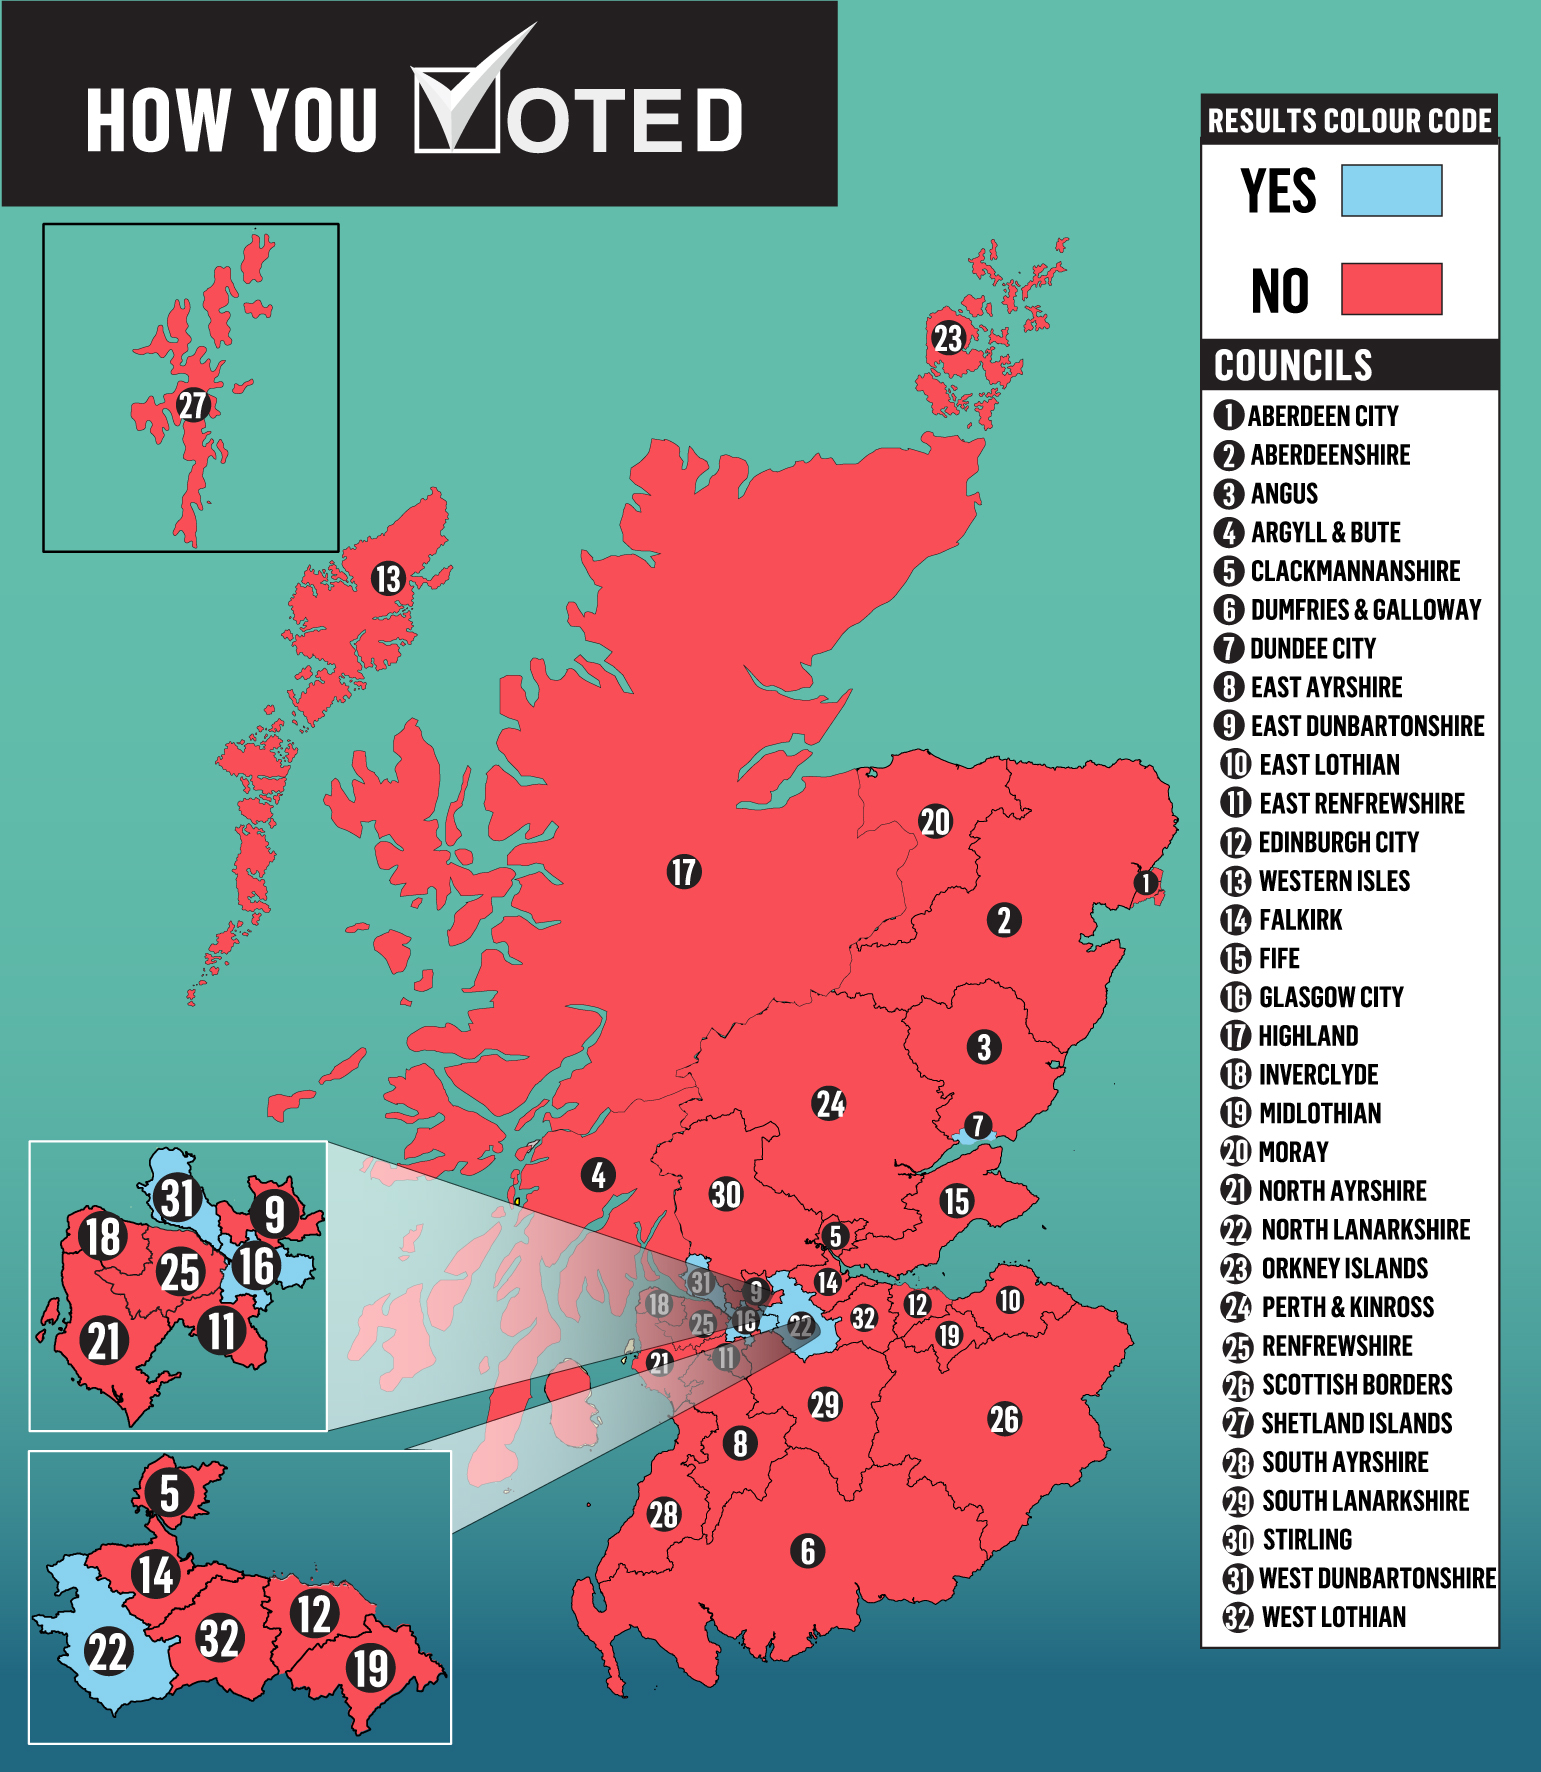 The Better Together campaign won 27 of the 32 available council areas in Scotland